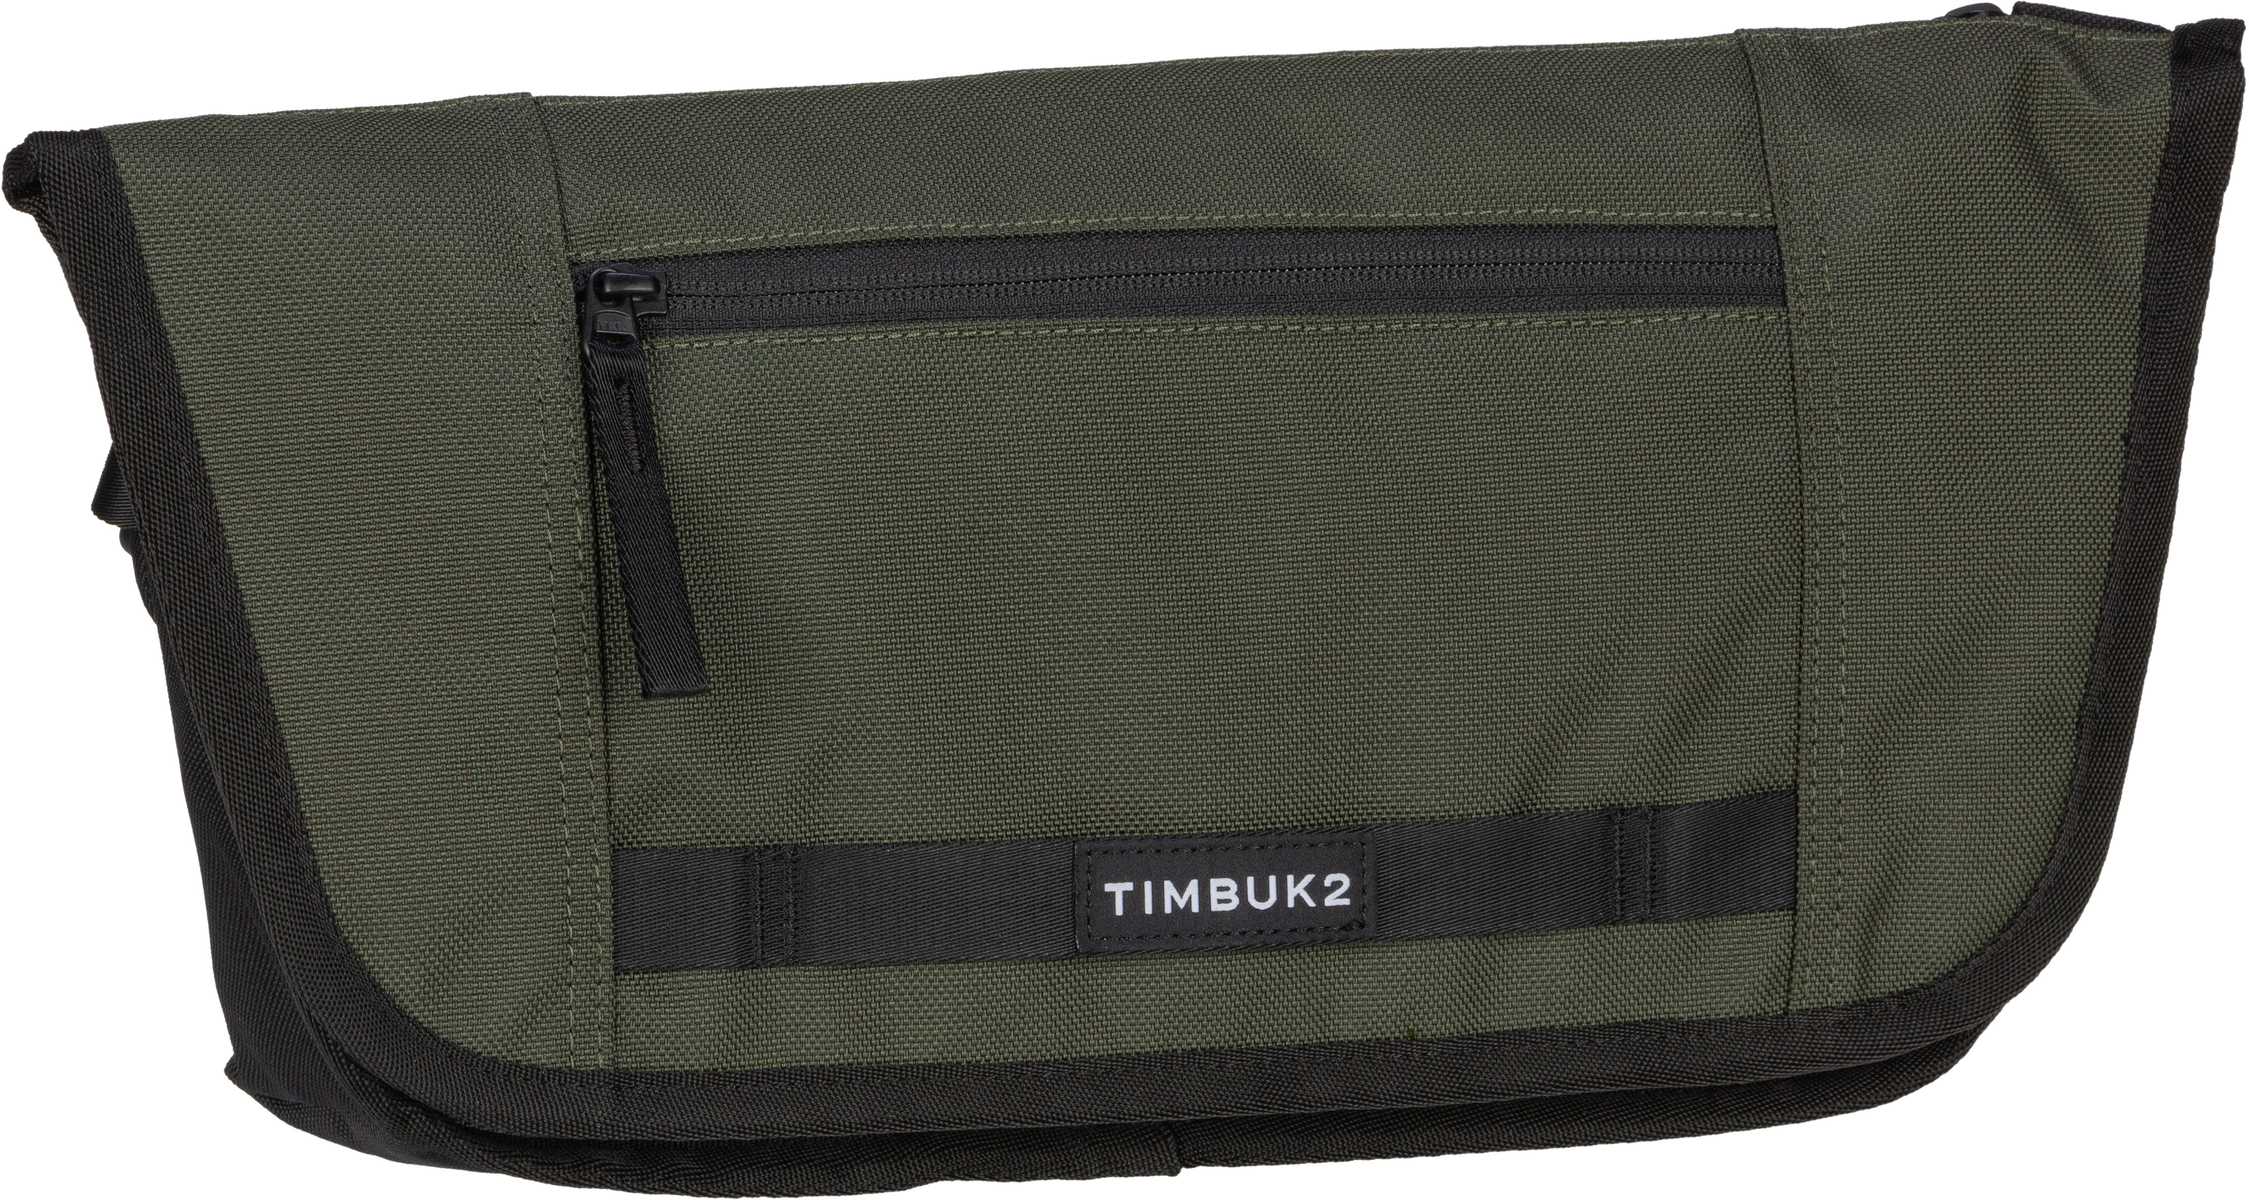 Timbuk2 Catapult Sling  in Eco Army Pop (6.9 Liter), Sling Bag